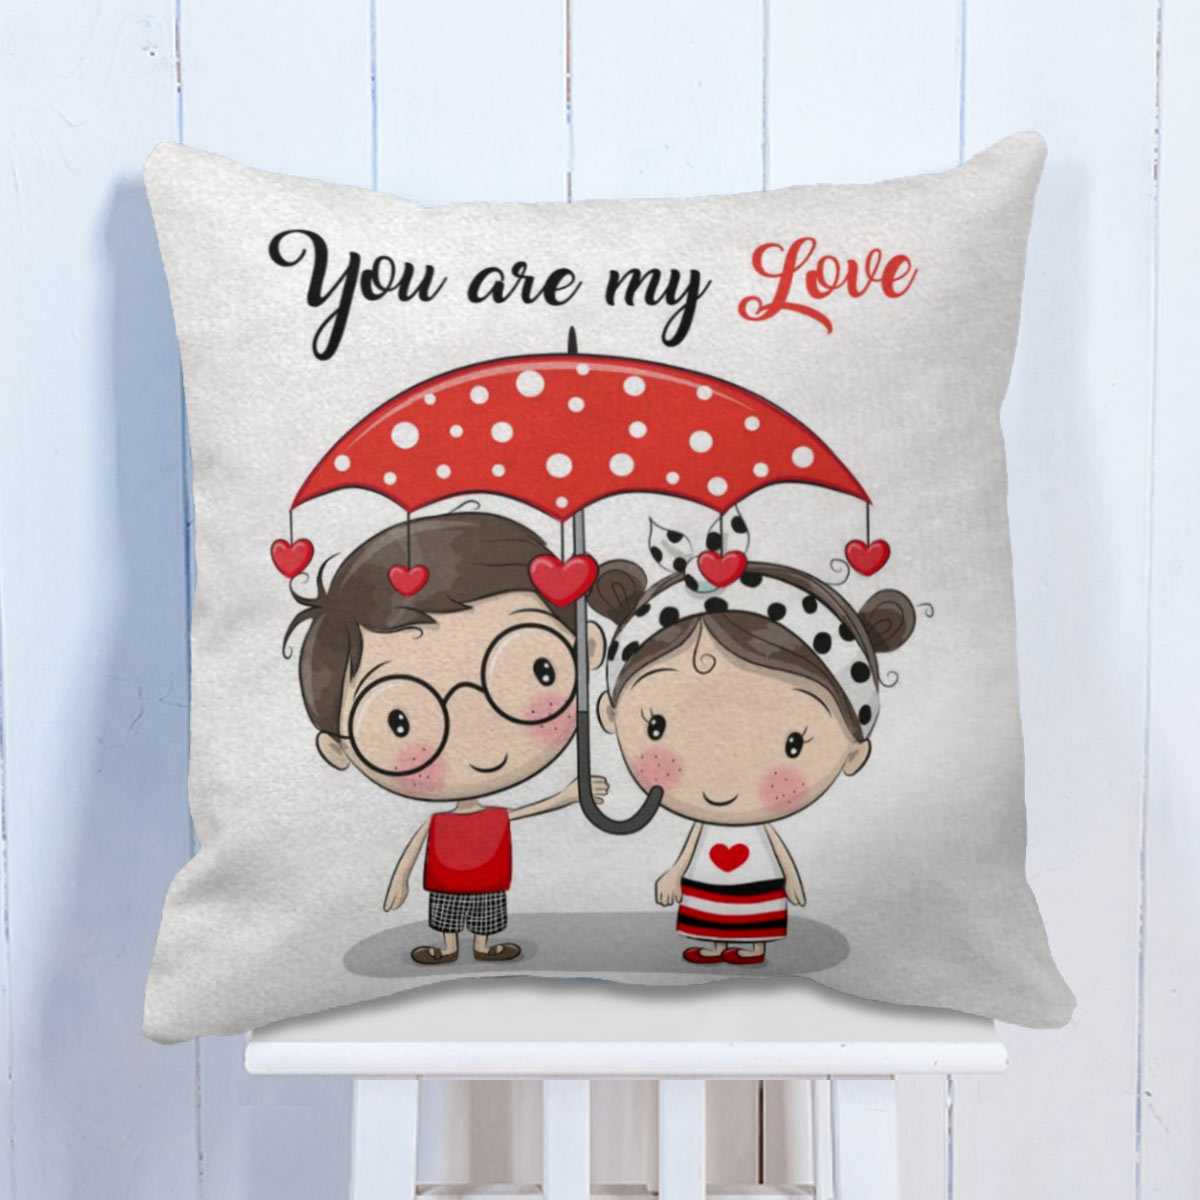 Your Are My Love Cushion